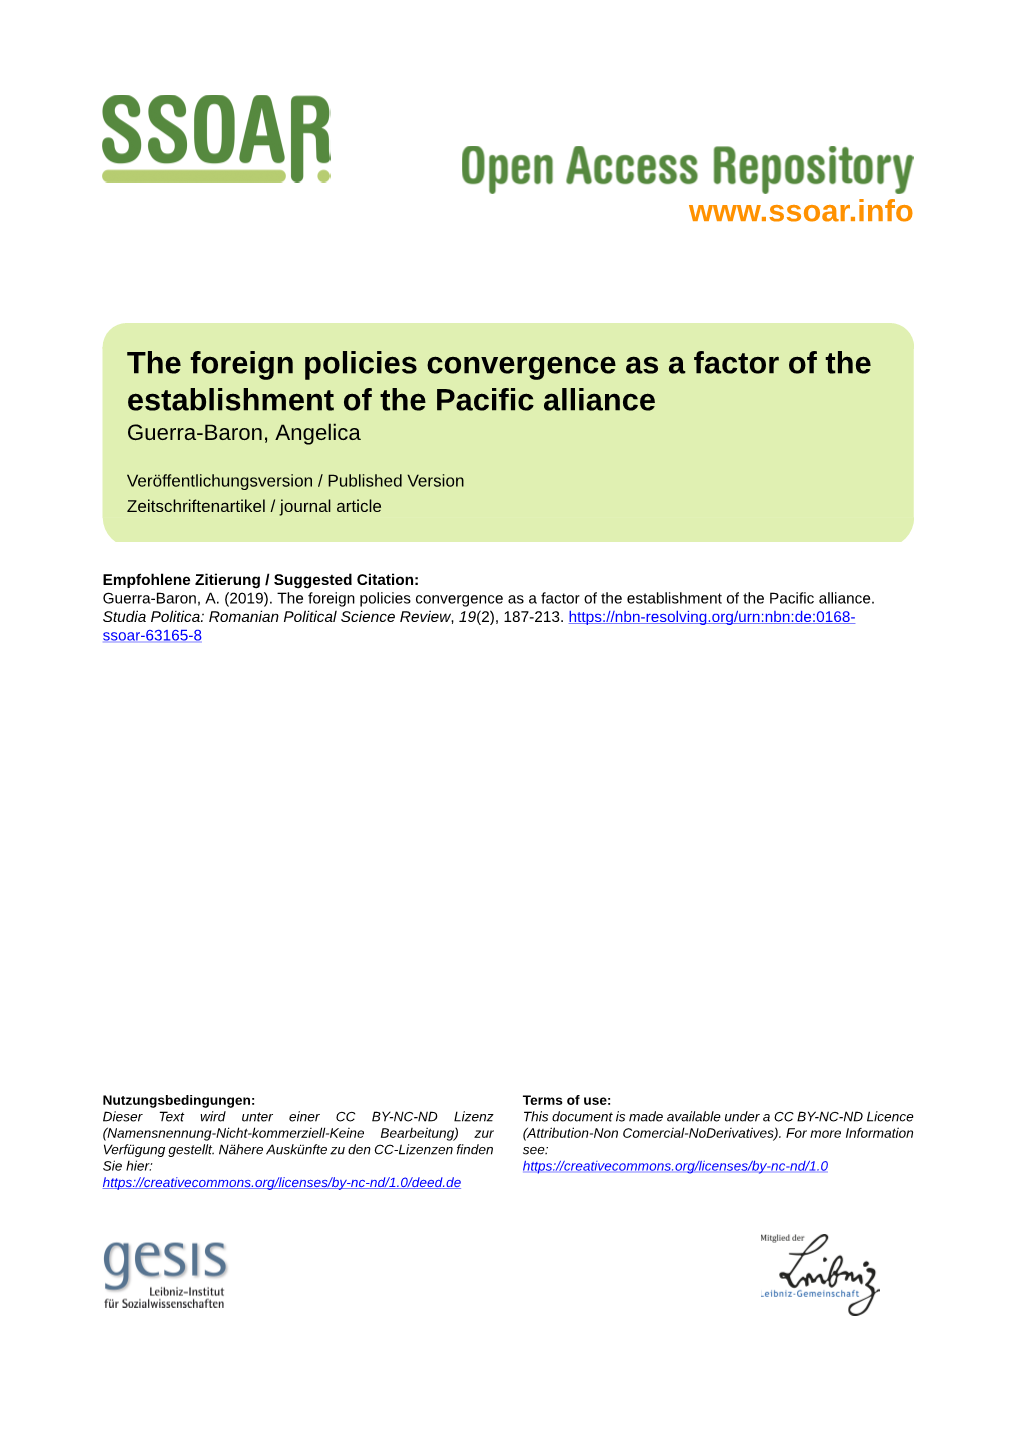 The Foreign Policies Convergence As a Factor of the Establishment of the Pacific Alliance Guerra-Baron, Angelica